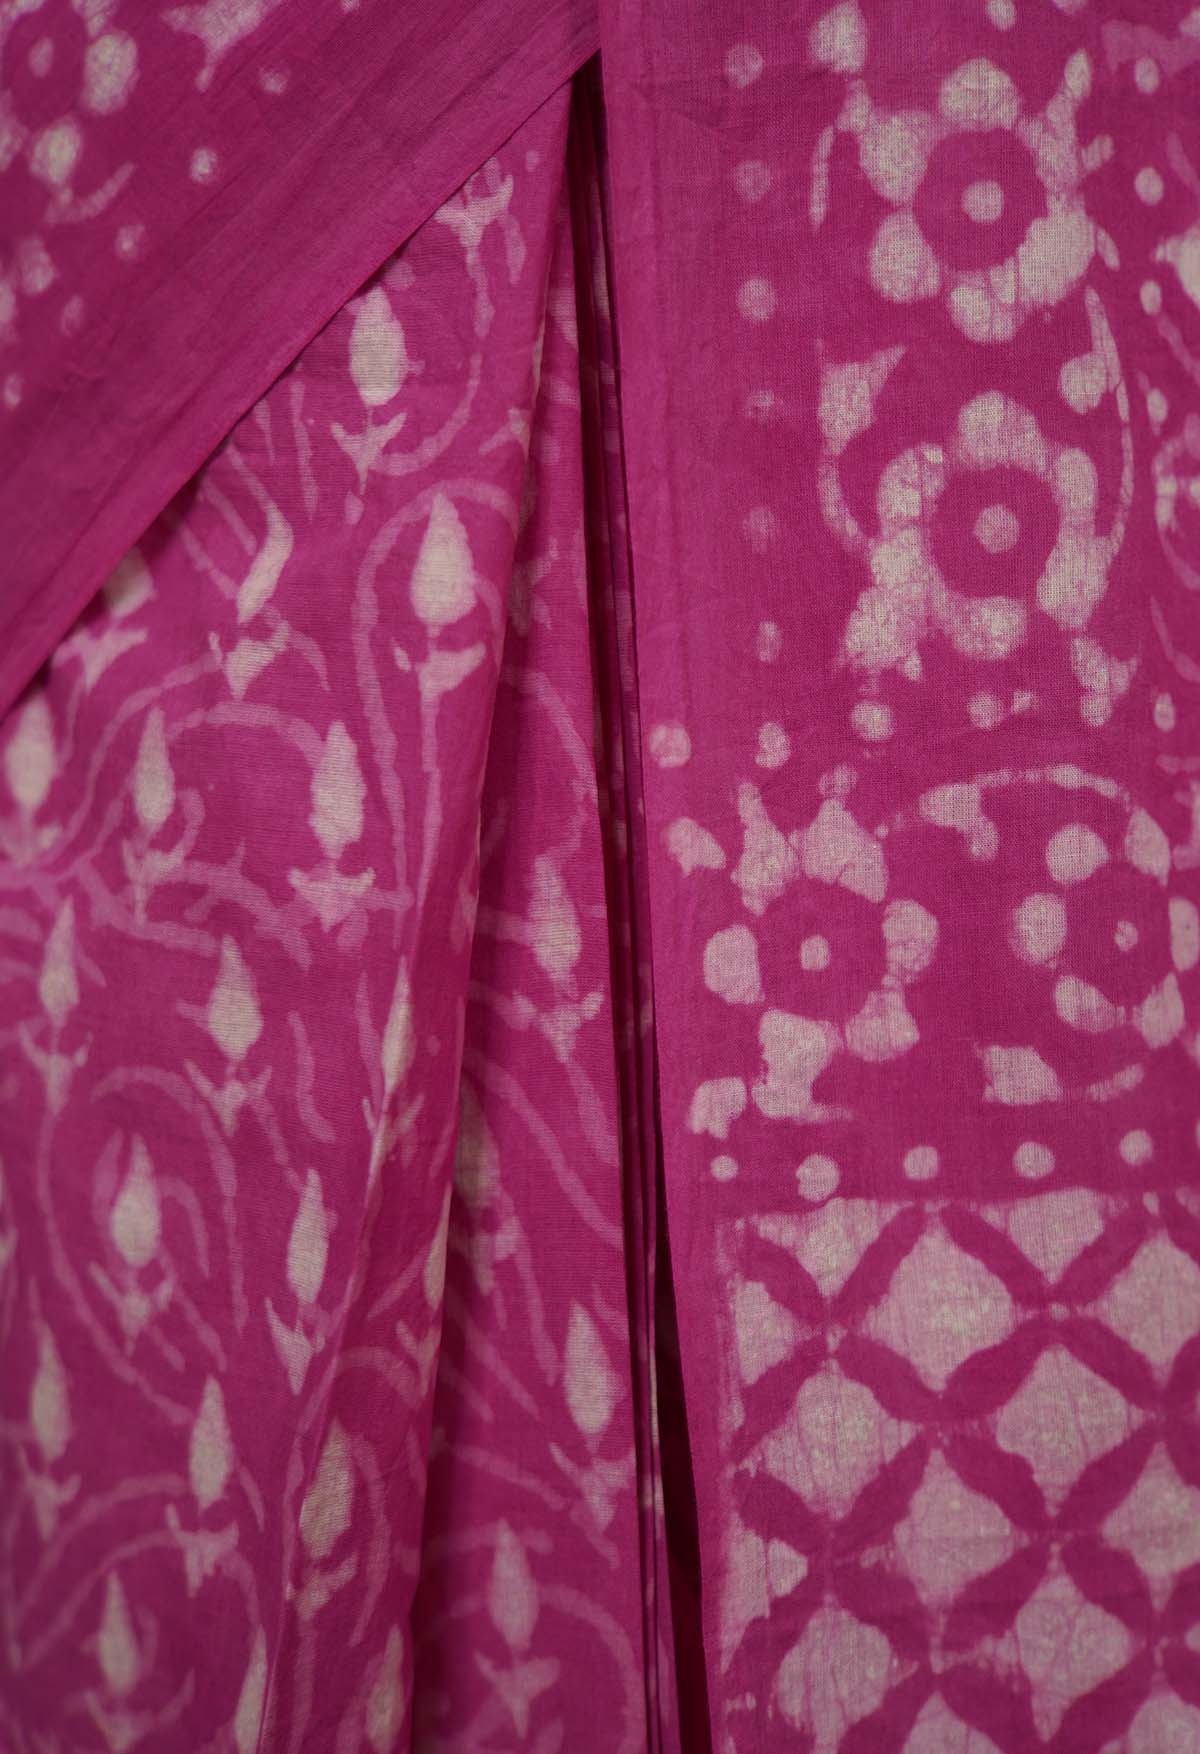 Paint the town pink with summery handblock print mulmul ready to wear saree